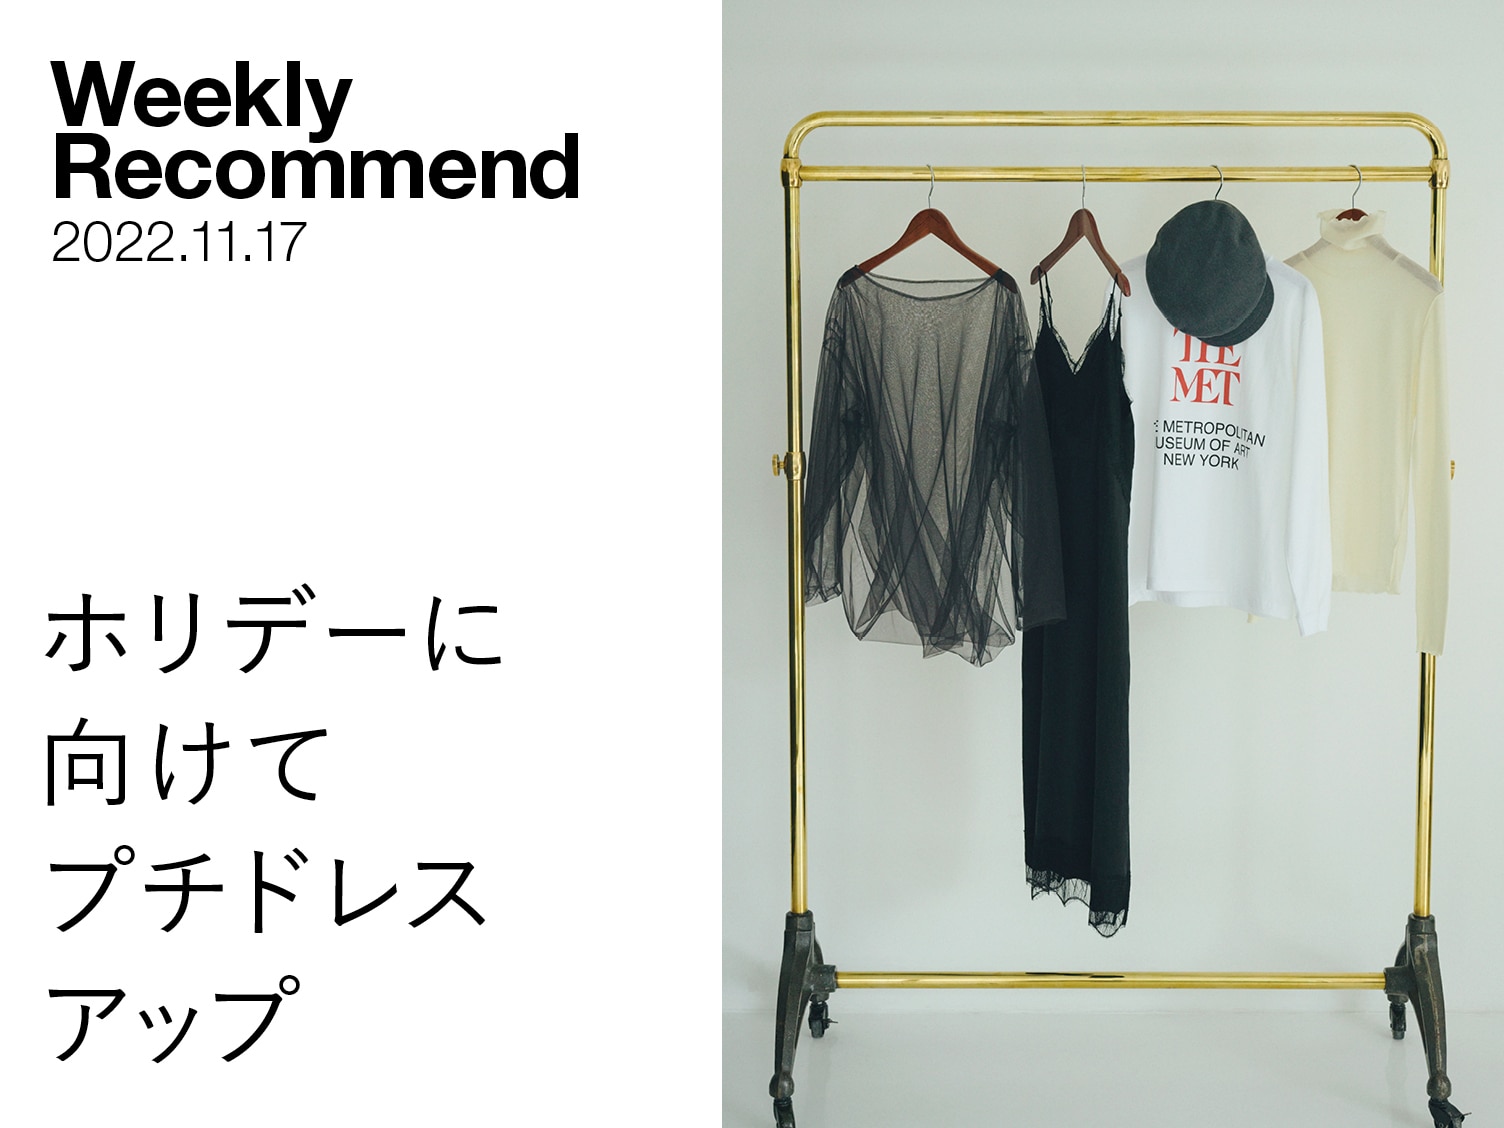 WEEKLY RECOMMEND ｜ ホリデーに向けて、プチドレスアップ